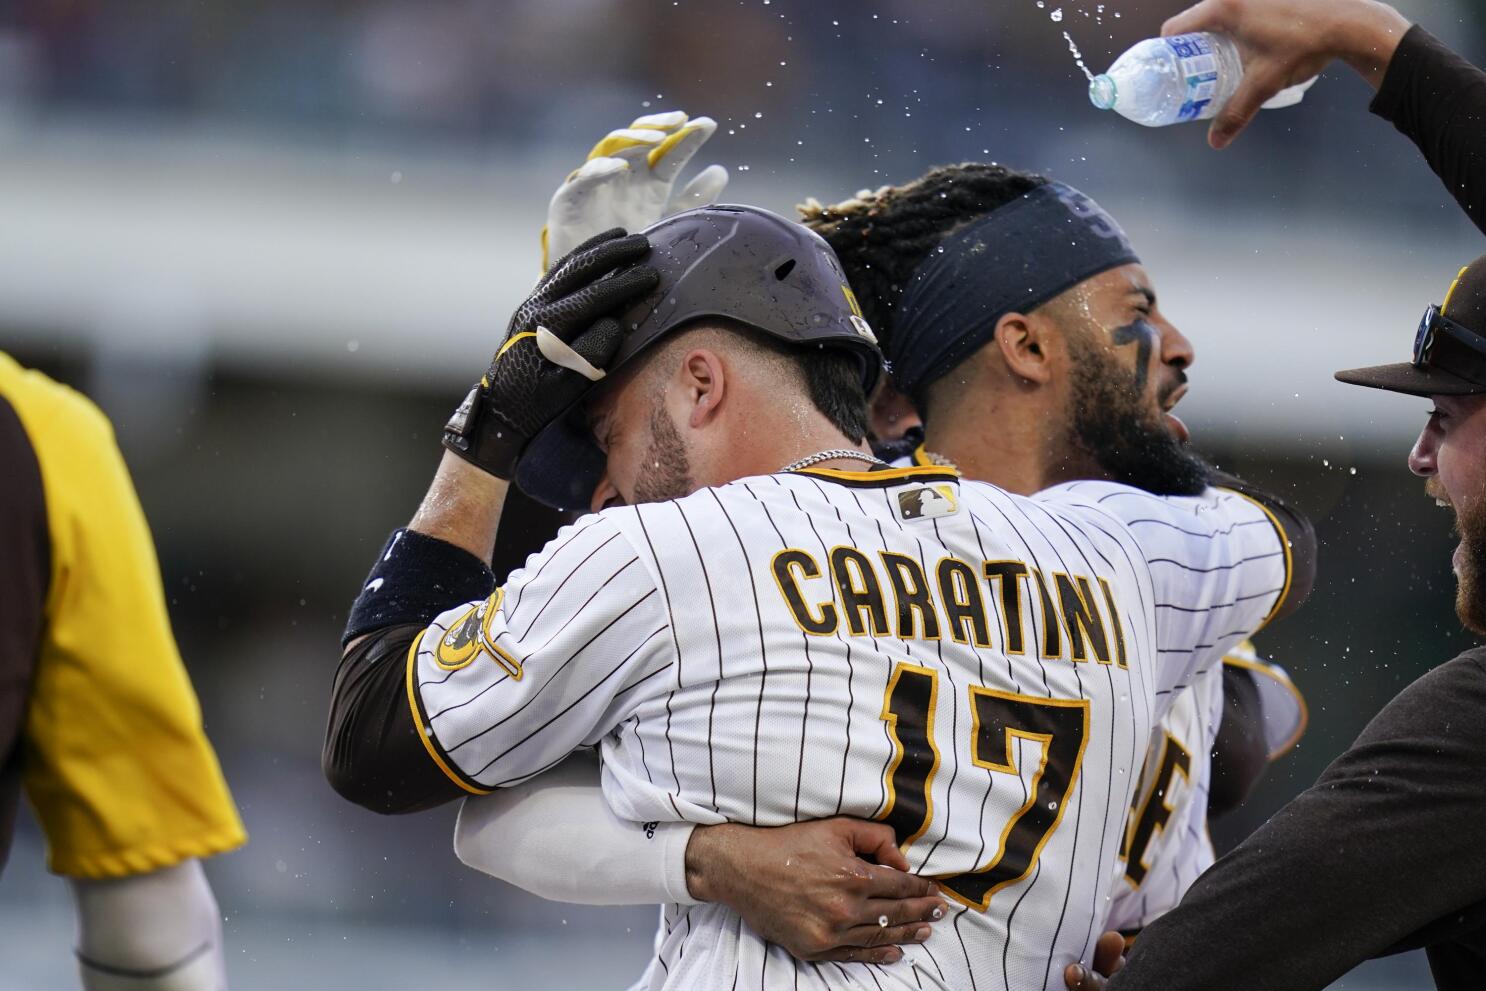 Pirates rally to complete three-game sweep of Padres